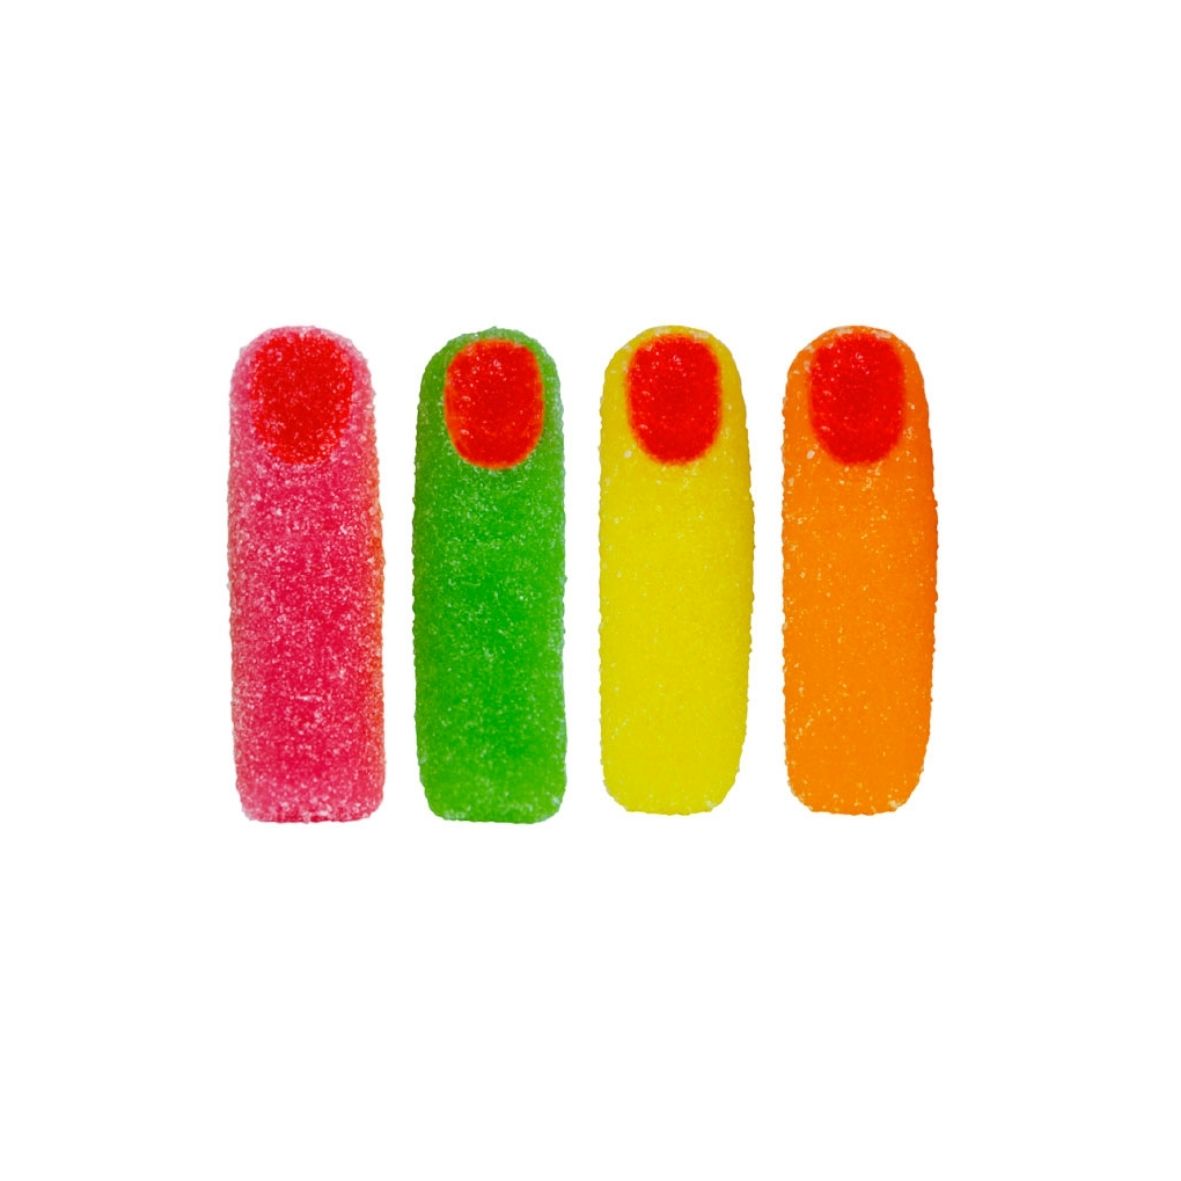 Jake – Jelly Mania – Sour Fingers